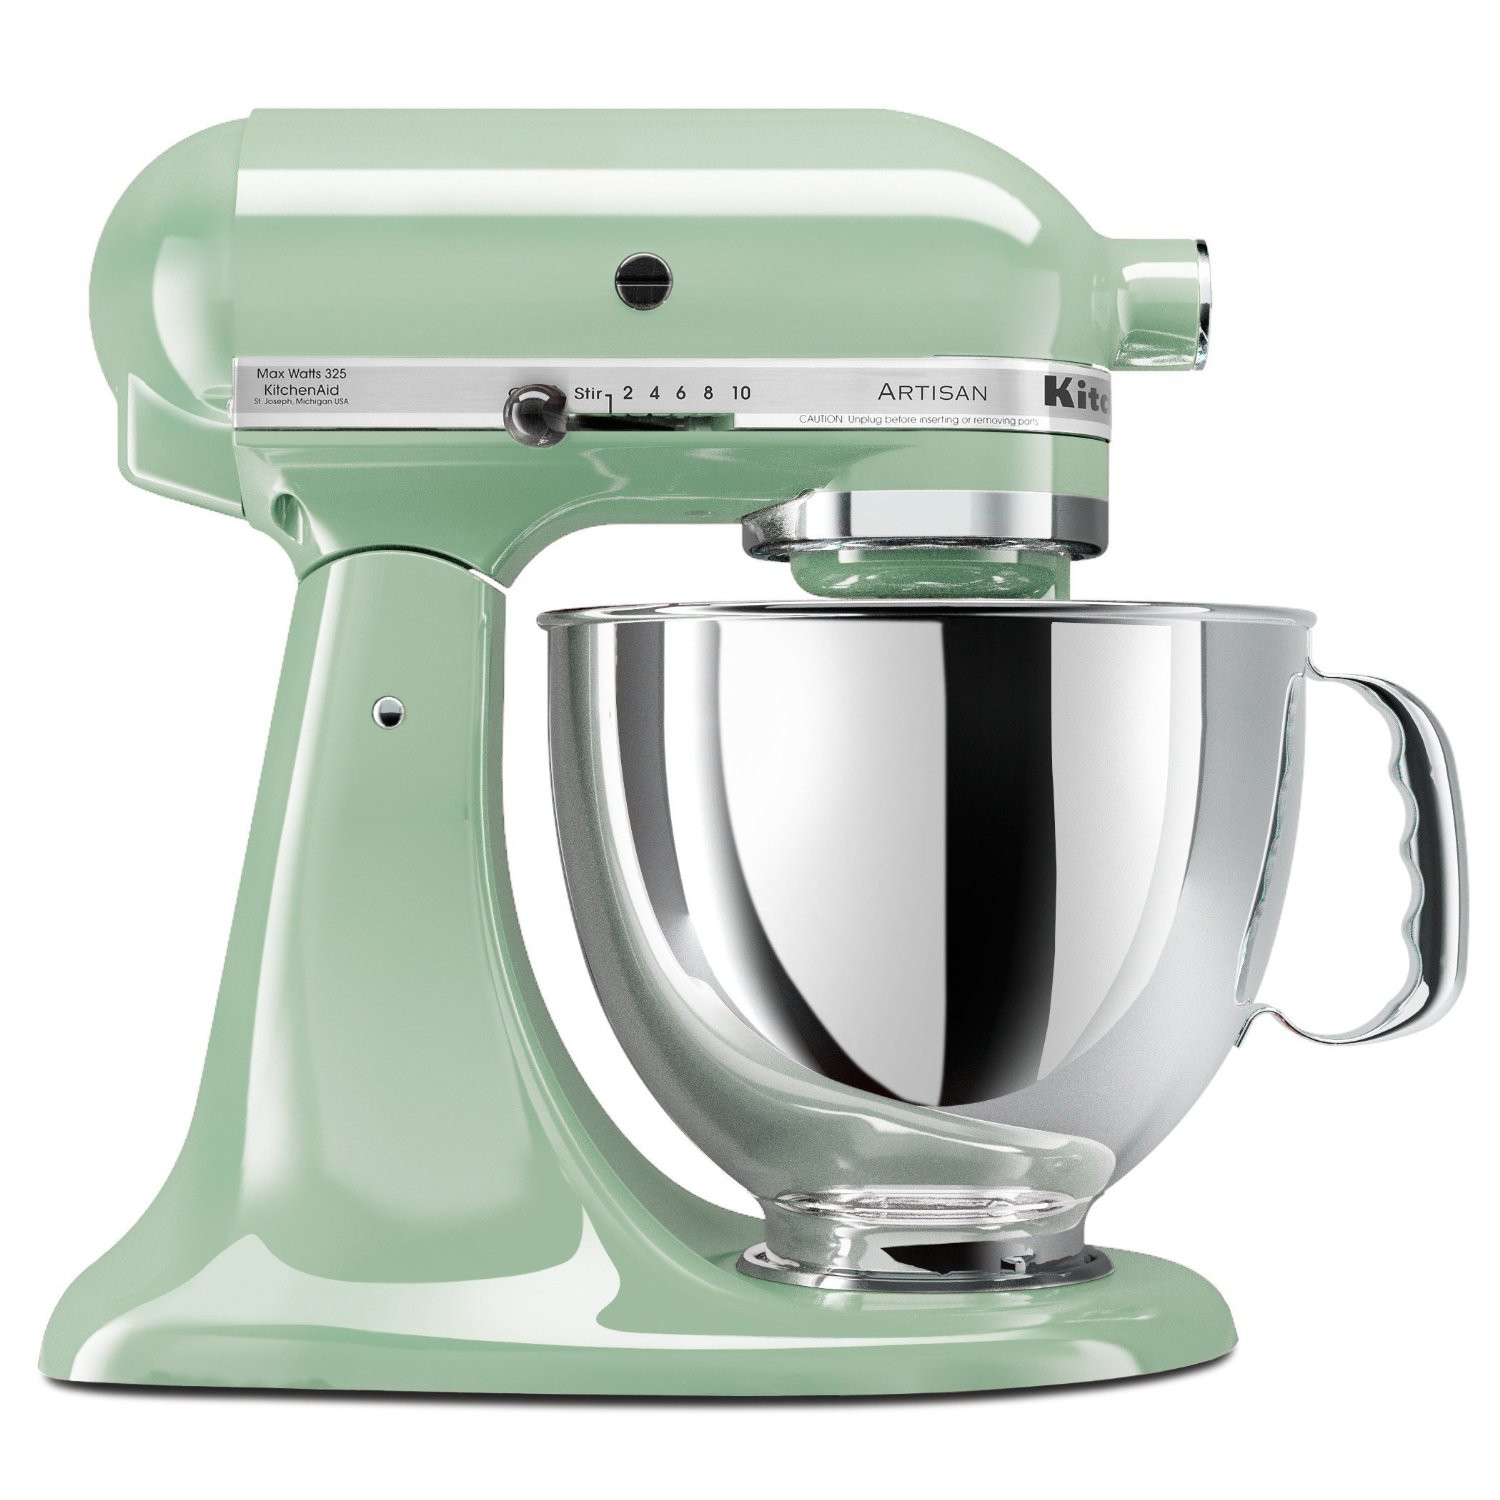 KitchenAid Coupons Up to 15 off + 4 Promo Codes